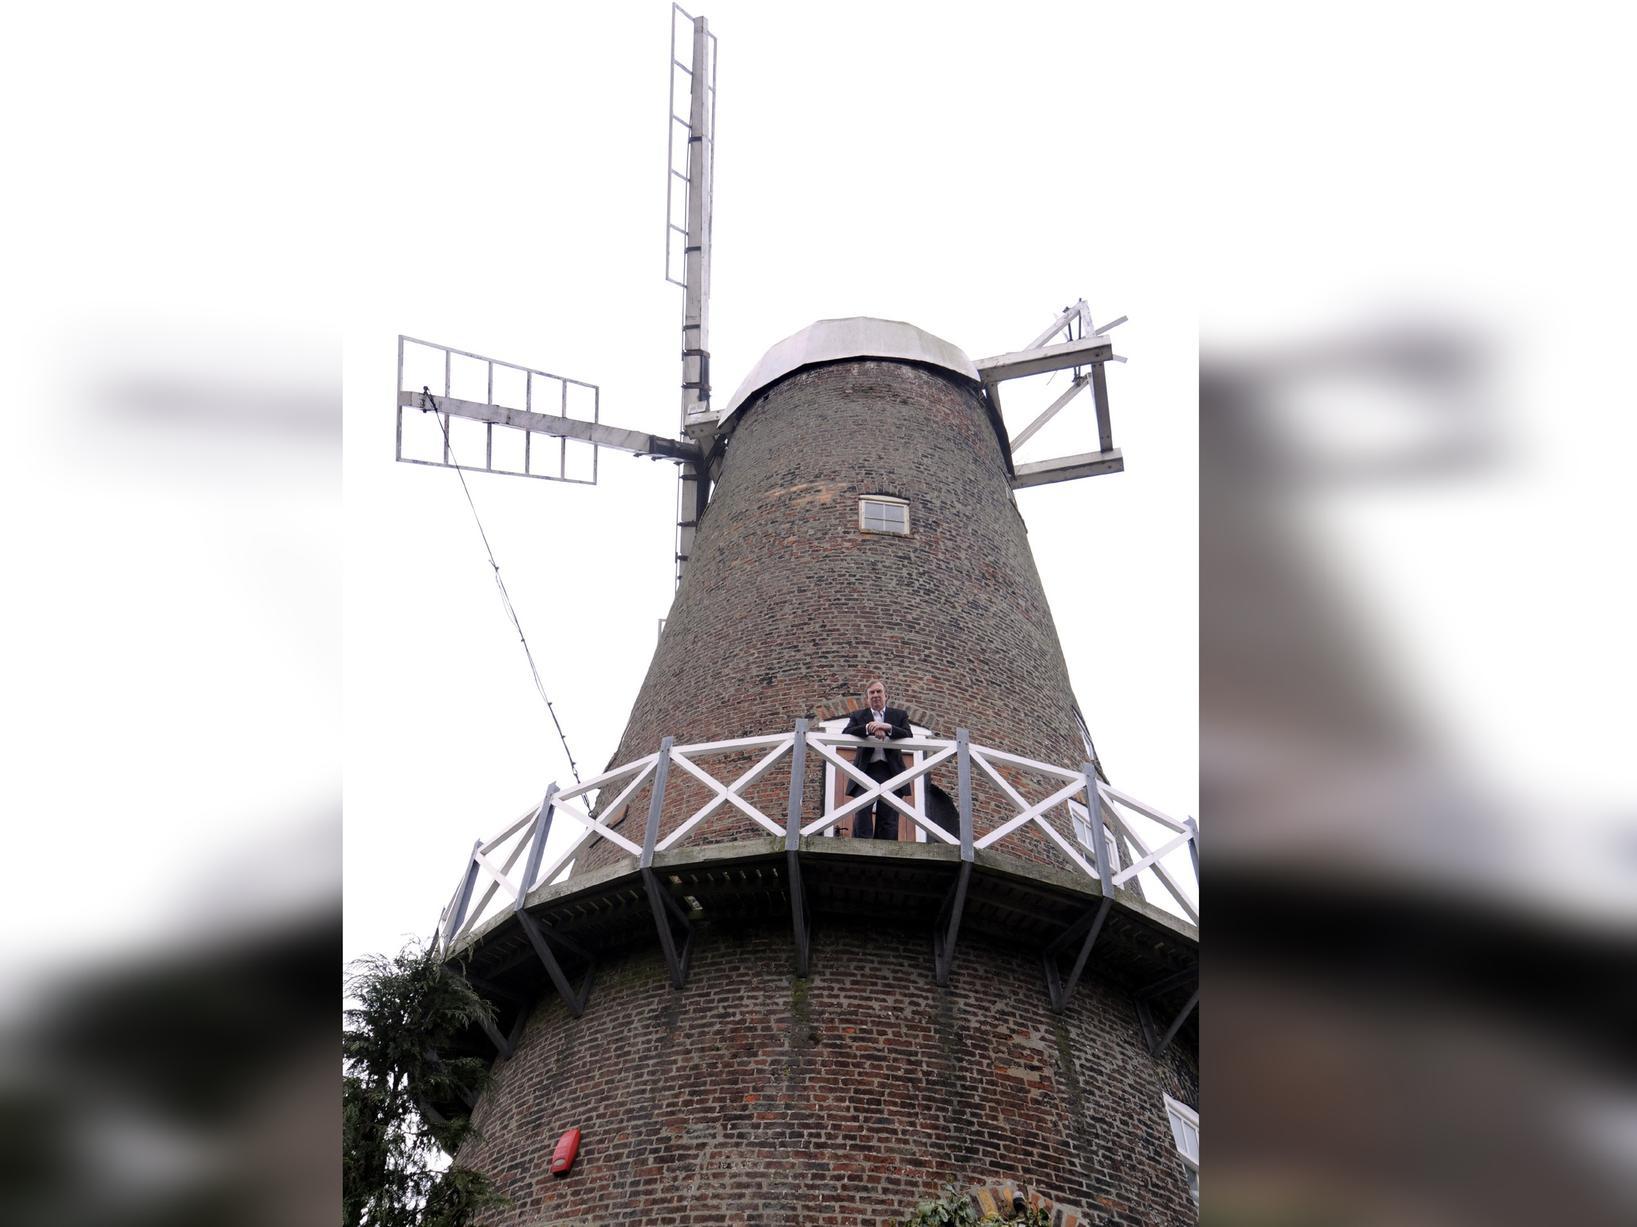 This windmill off Victoria Road is the last remaining windmill in Scarborough. It has been turned into a guesthouse.